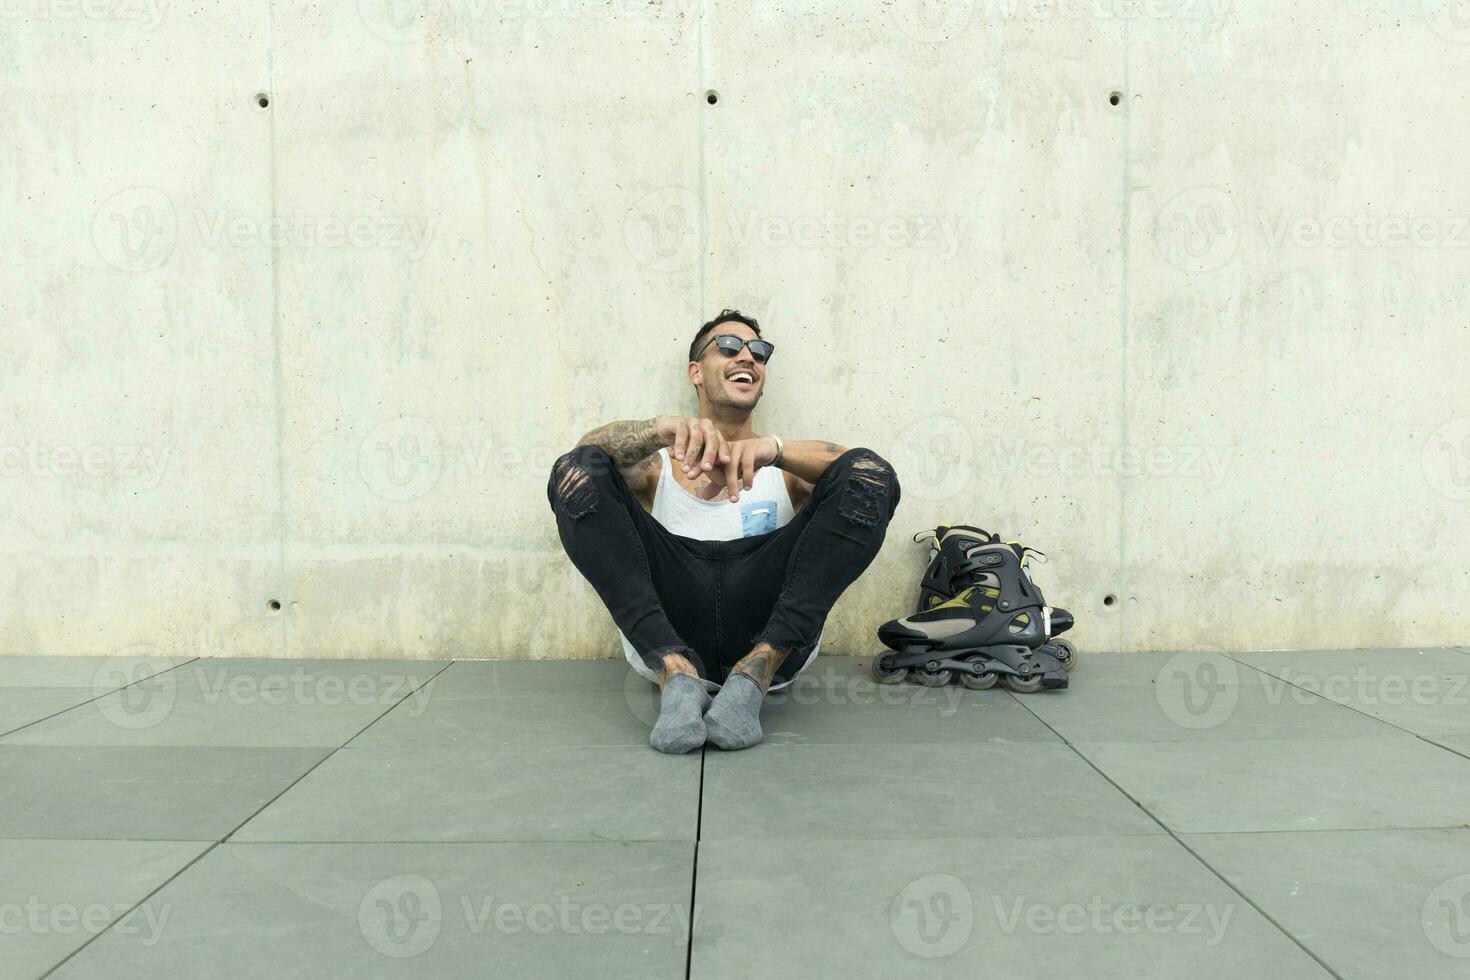 Tattooed young man with roller skates sitting on ground having fun photo